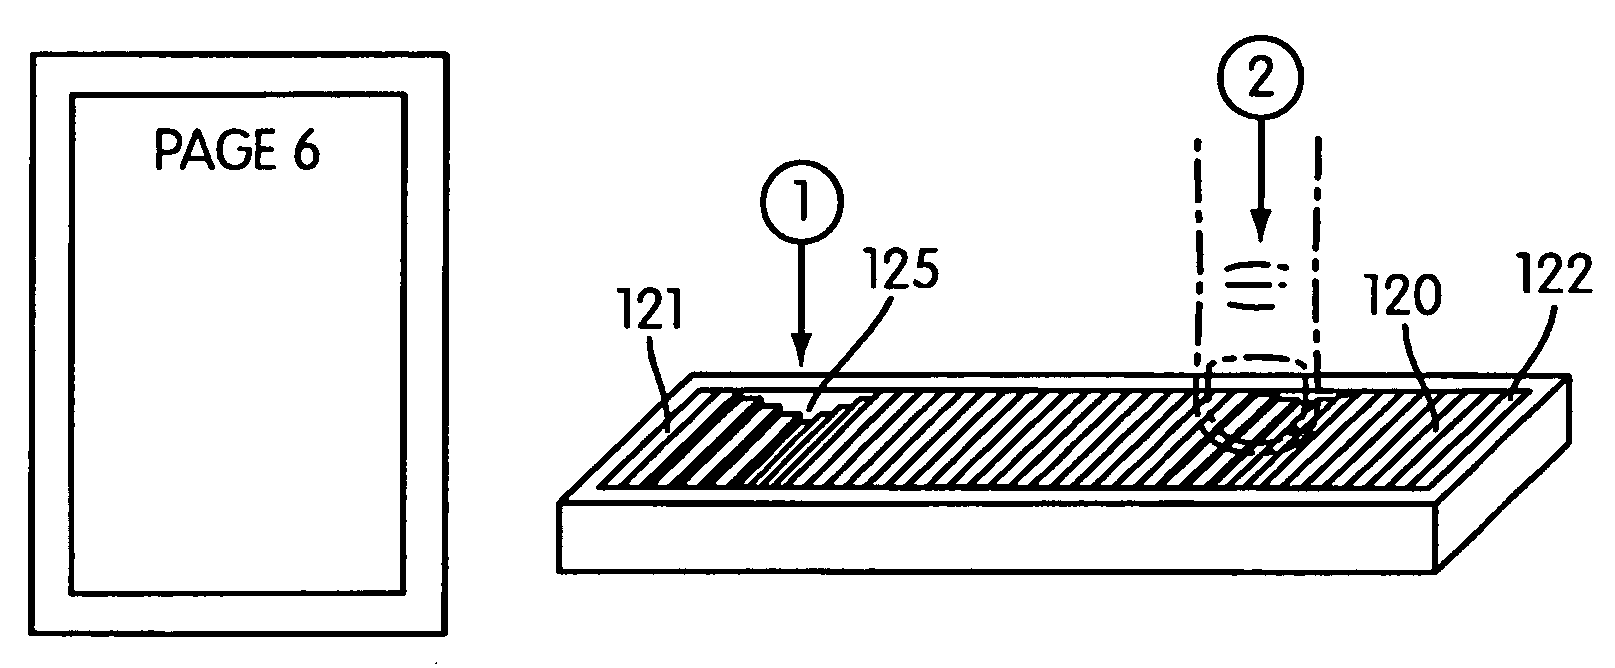 Tactile device for scrolling